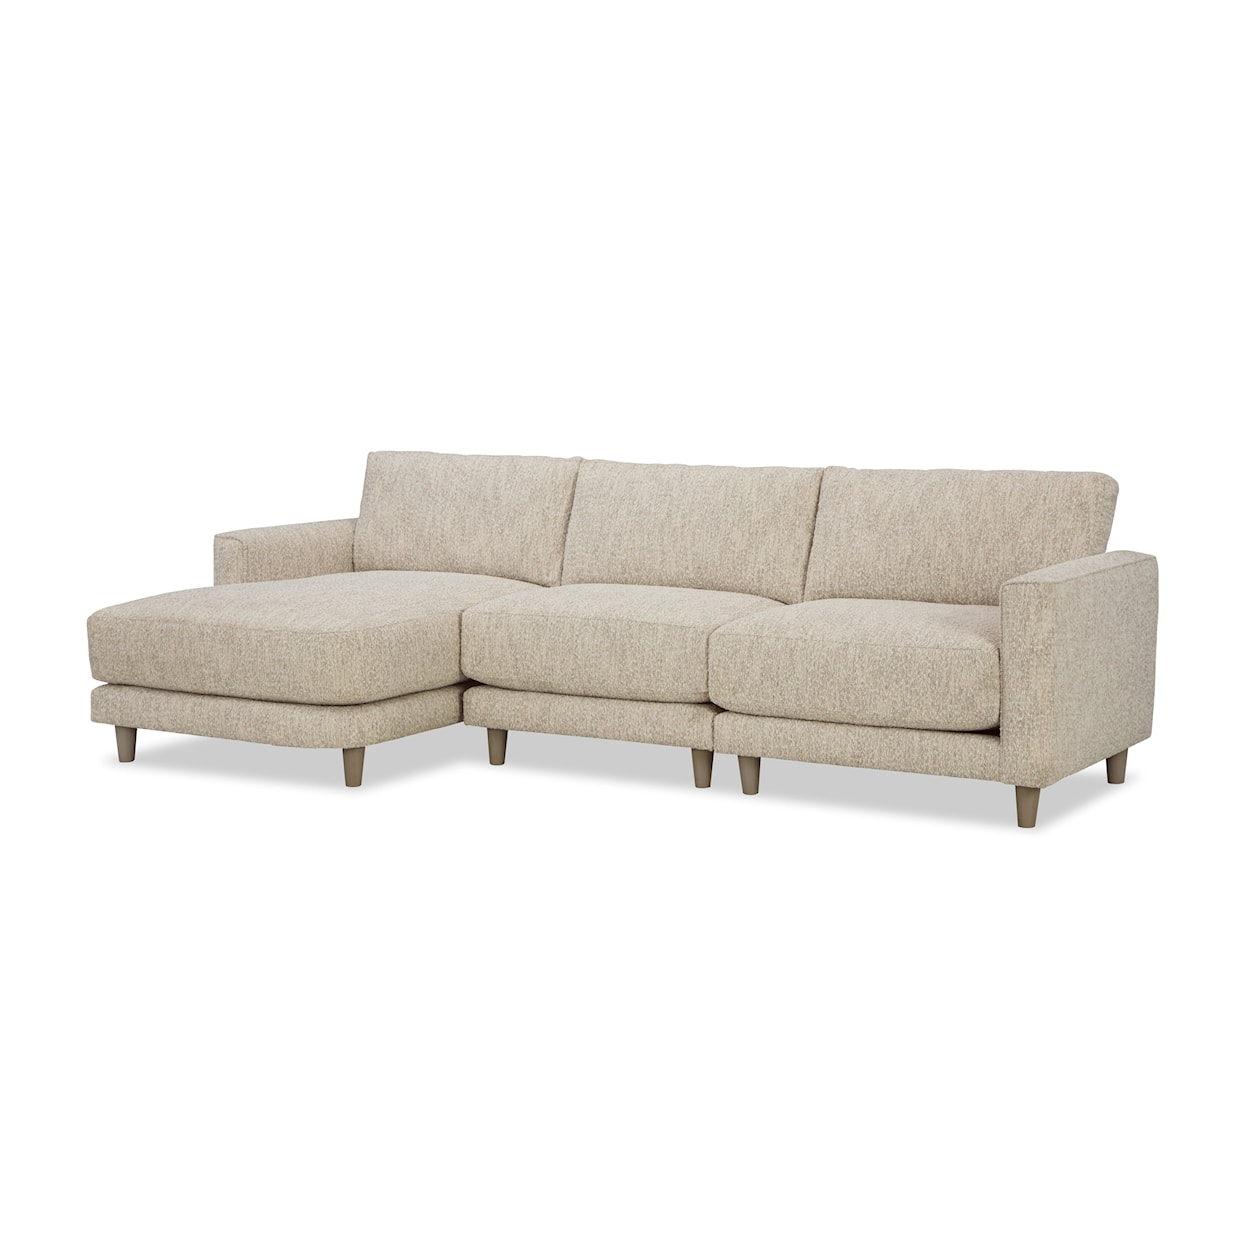 Hickory Craft 735200BD Chaise Sofa